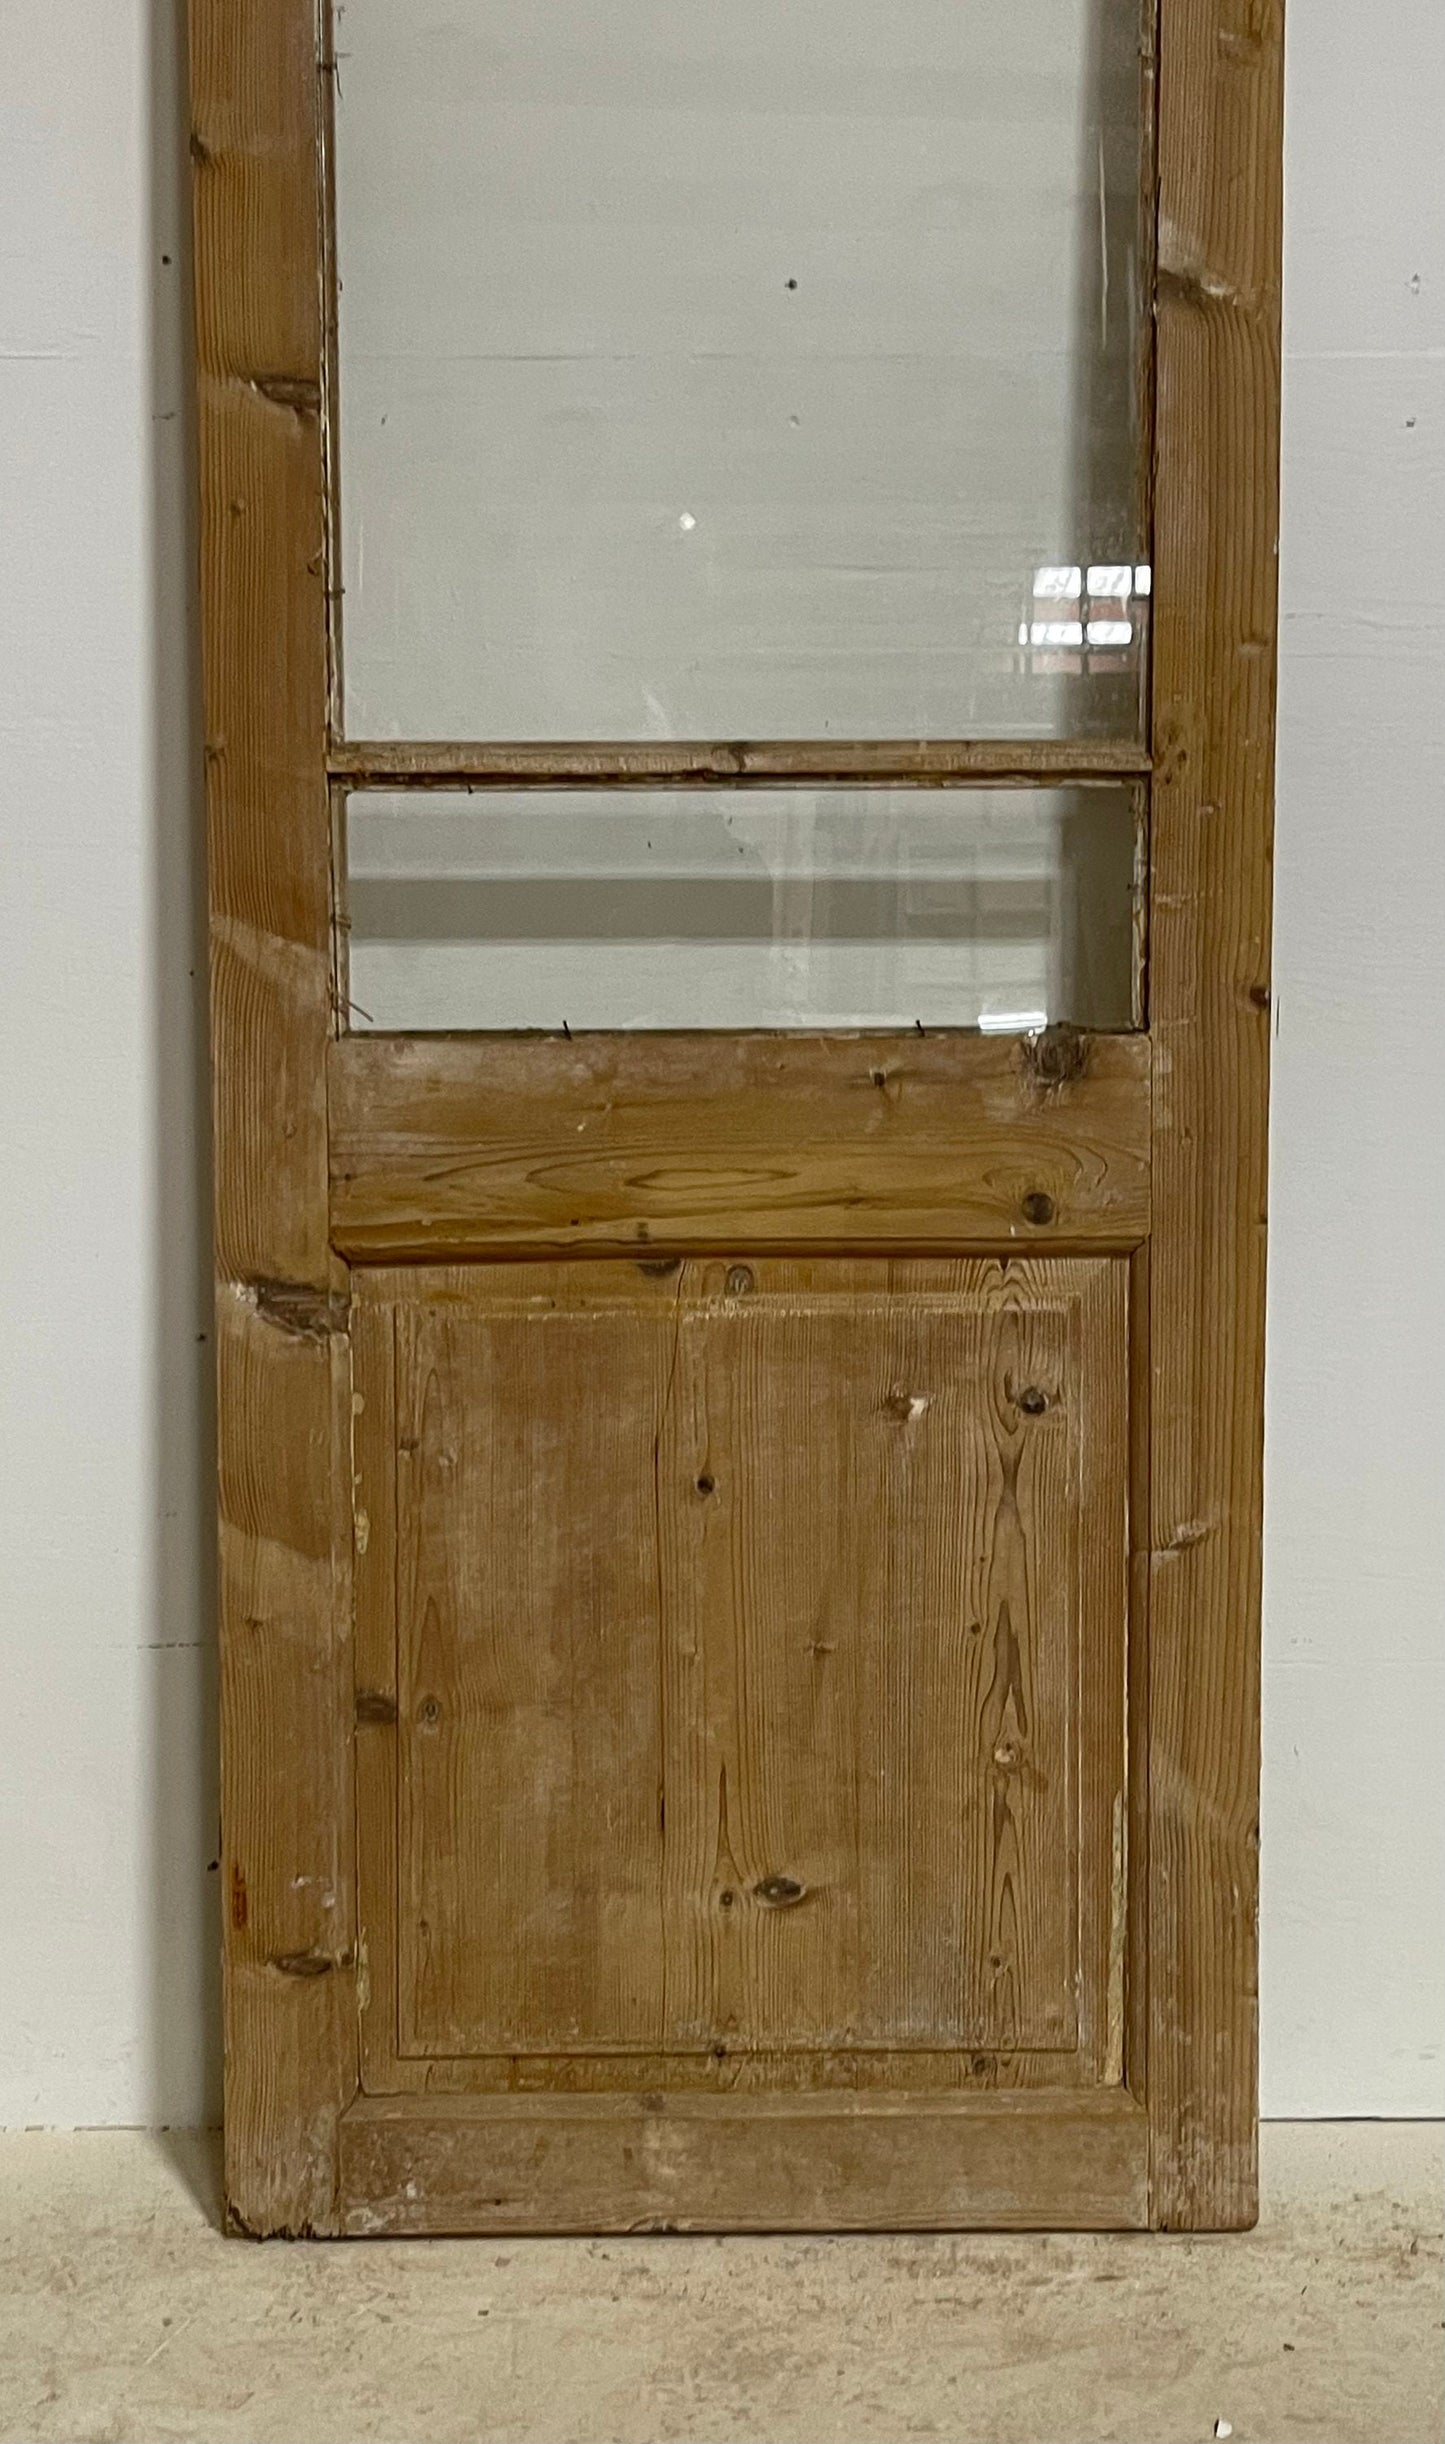 Antique French panel door with glass (84x26.75) G1255s